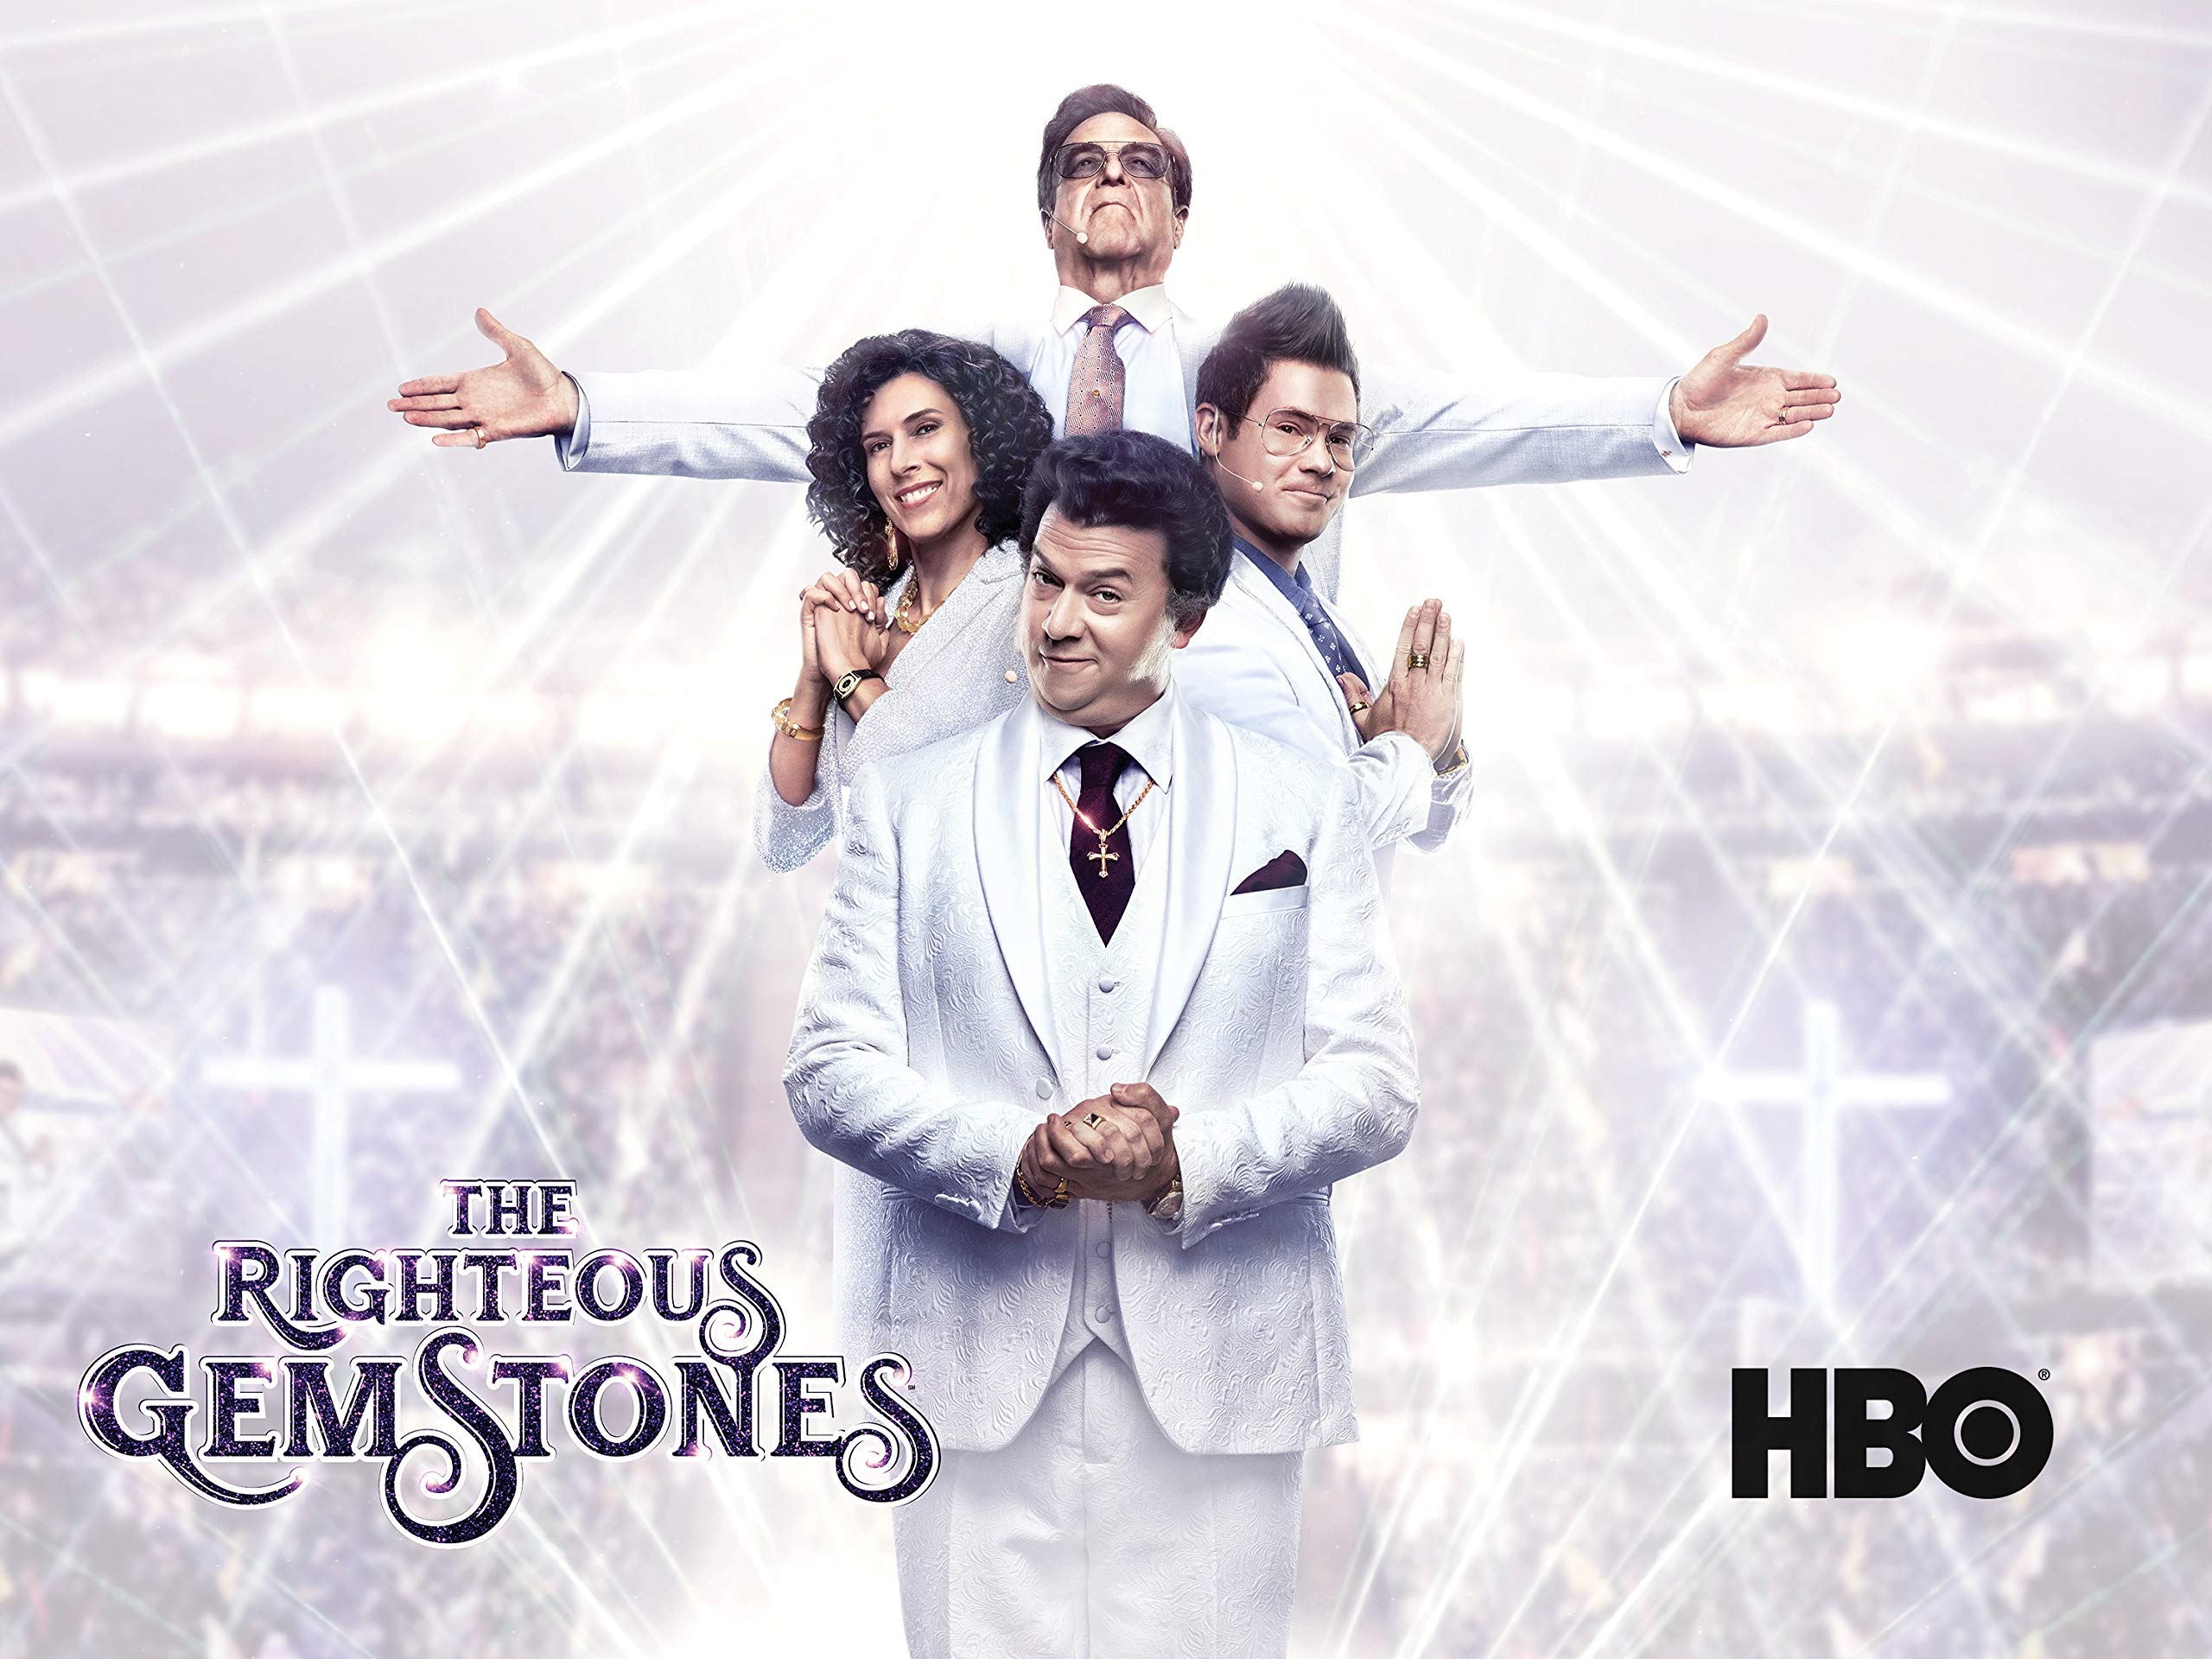 The Righteous Gemstones – Ecclesiastical Comedy